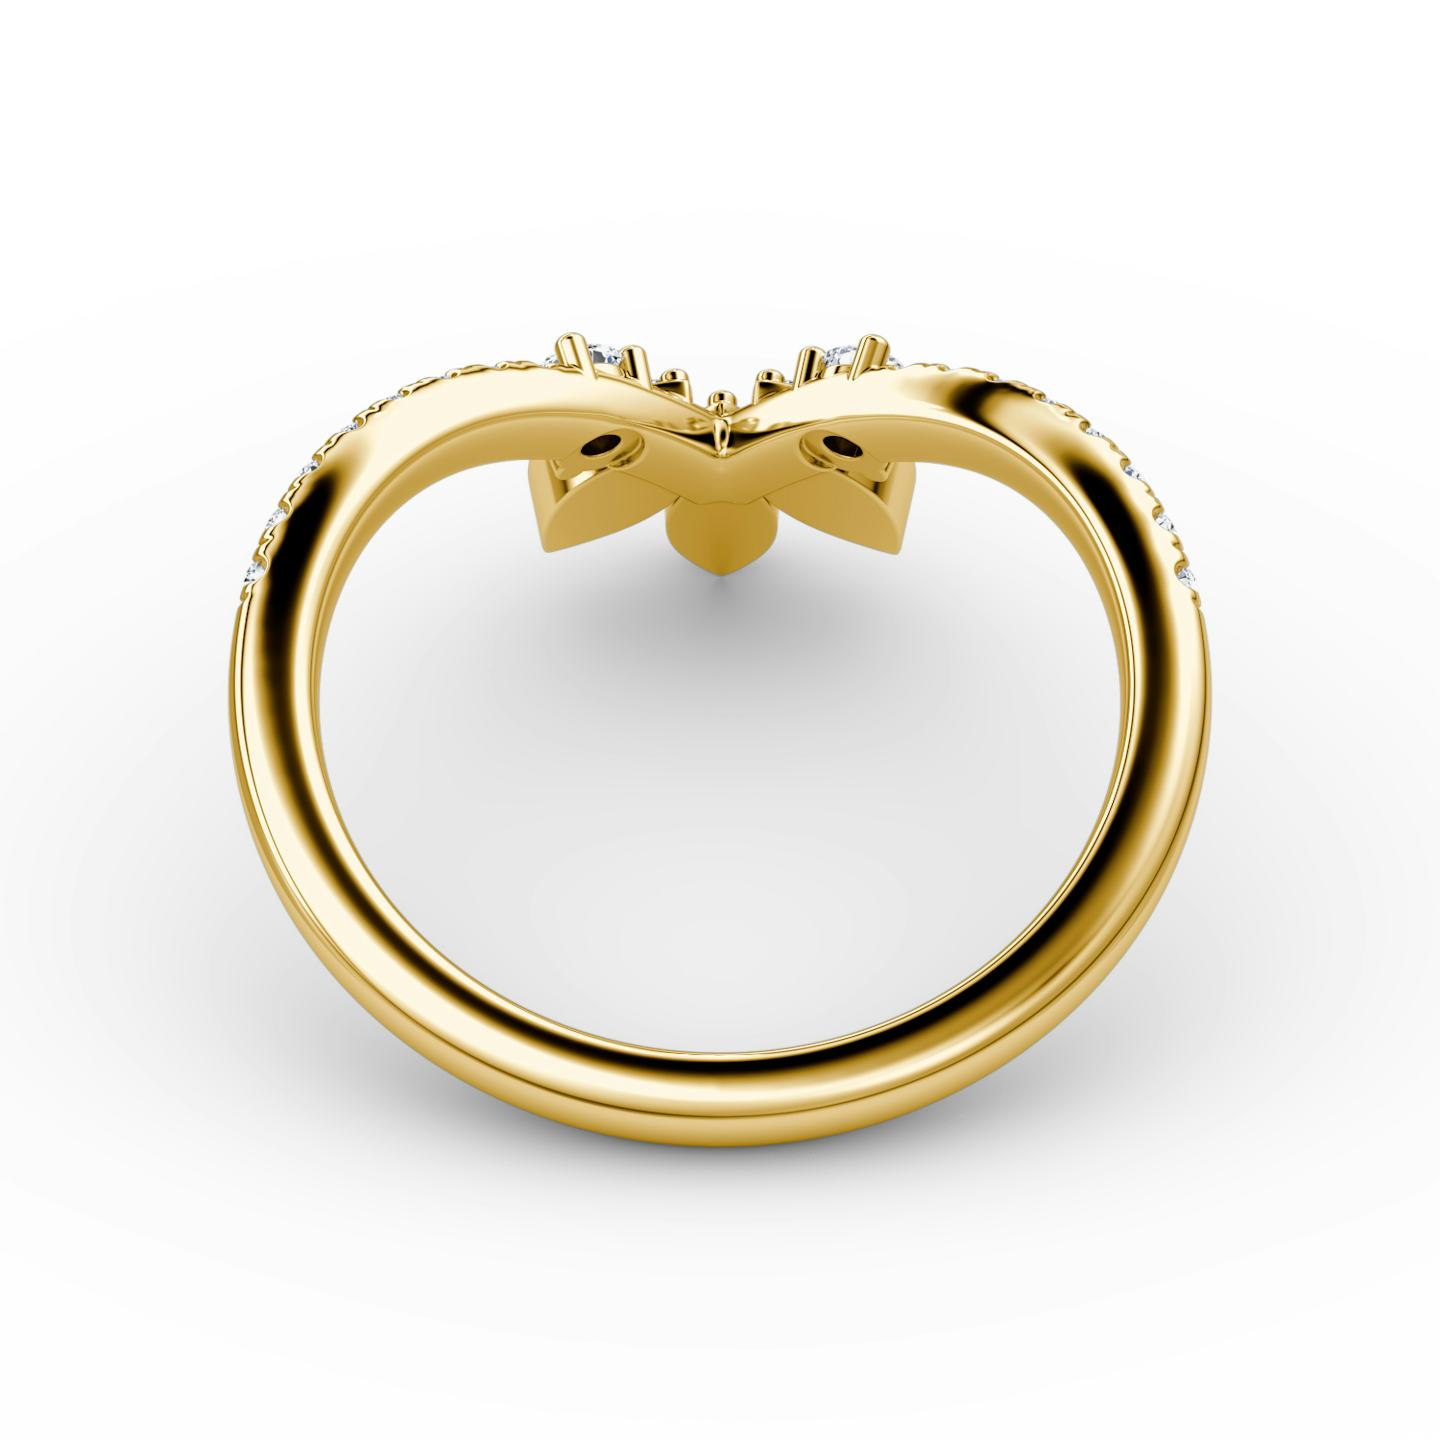 The Petal Crown Band | Round Brilliant | 18k | 18k Yellow Gold | Band: Pavé